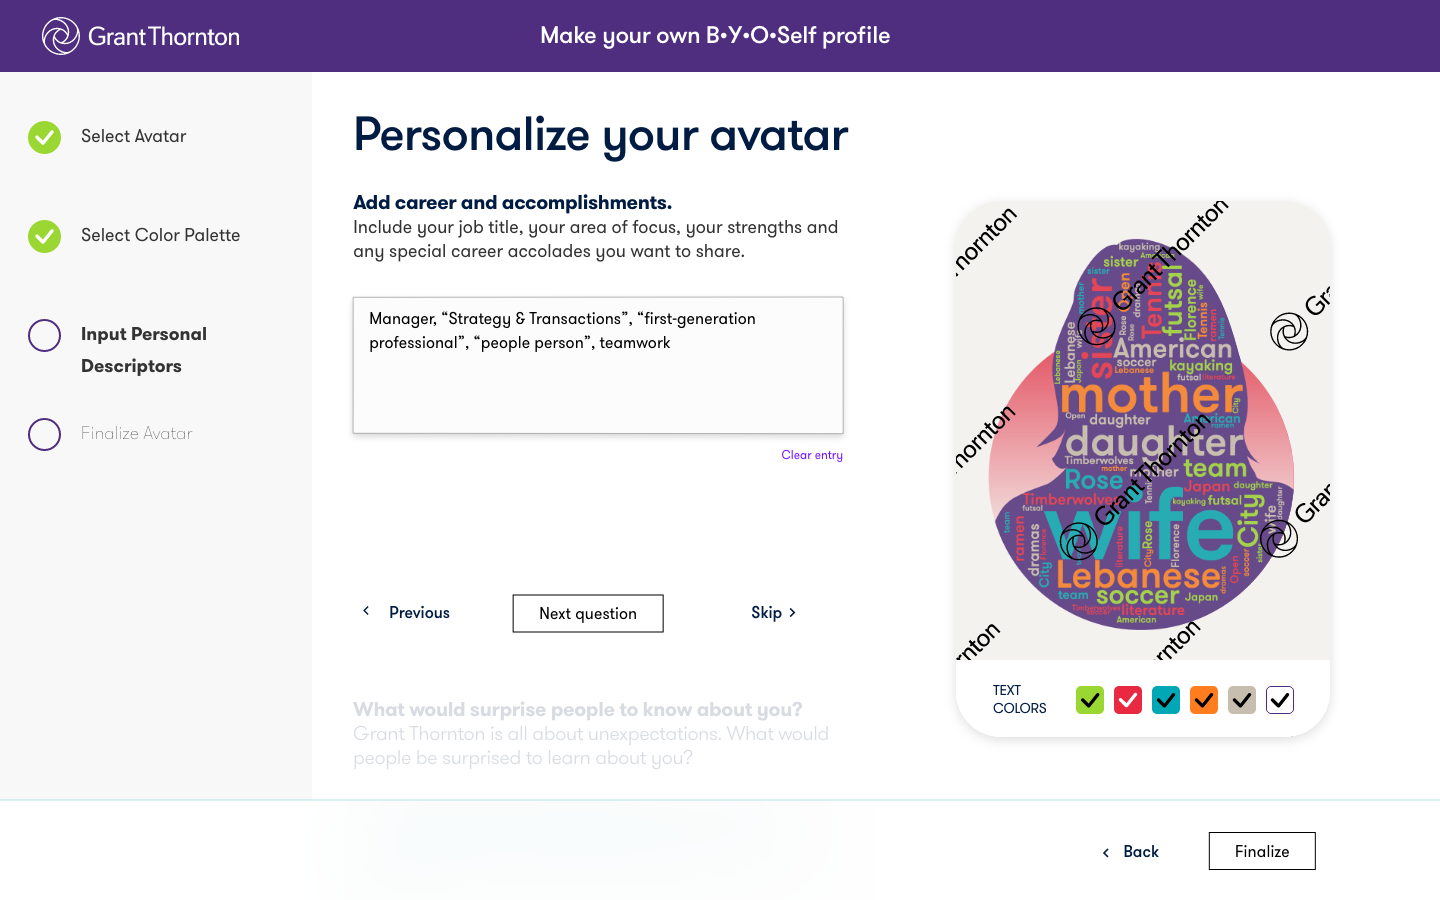 Add Personal Touch – Entries 6